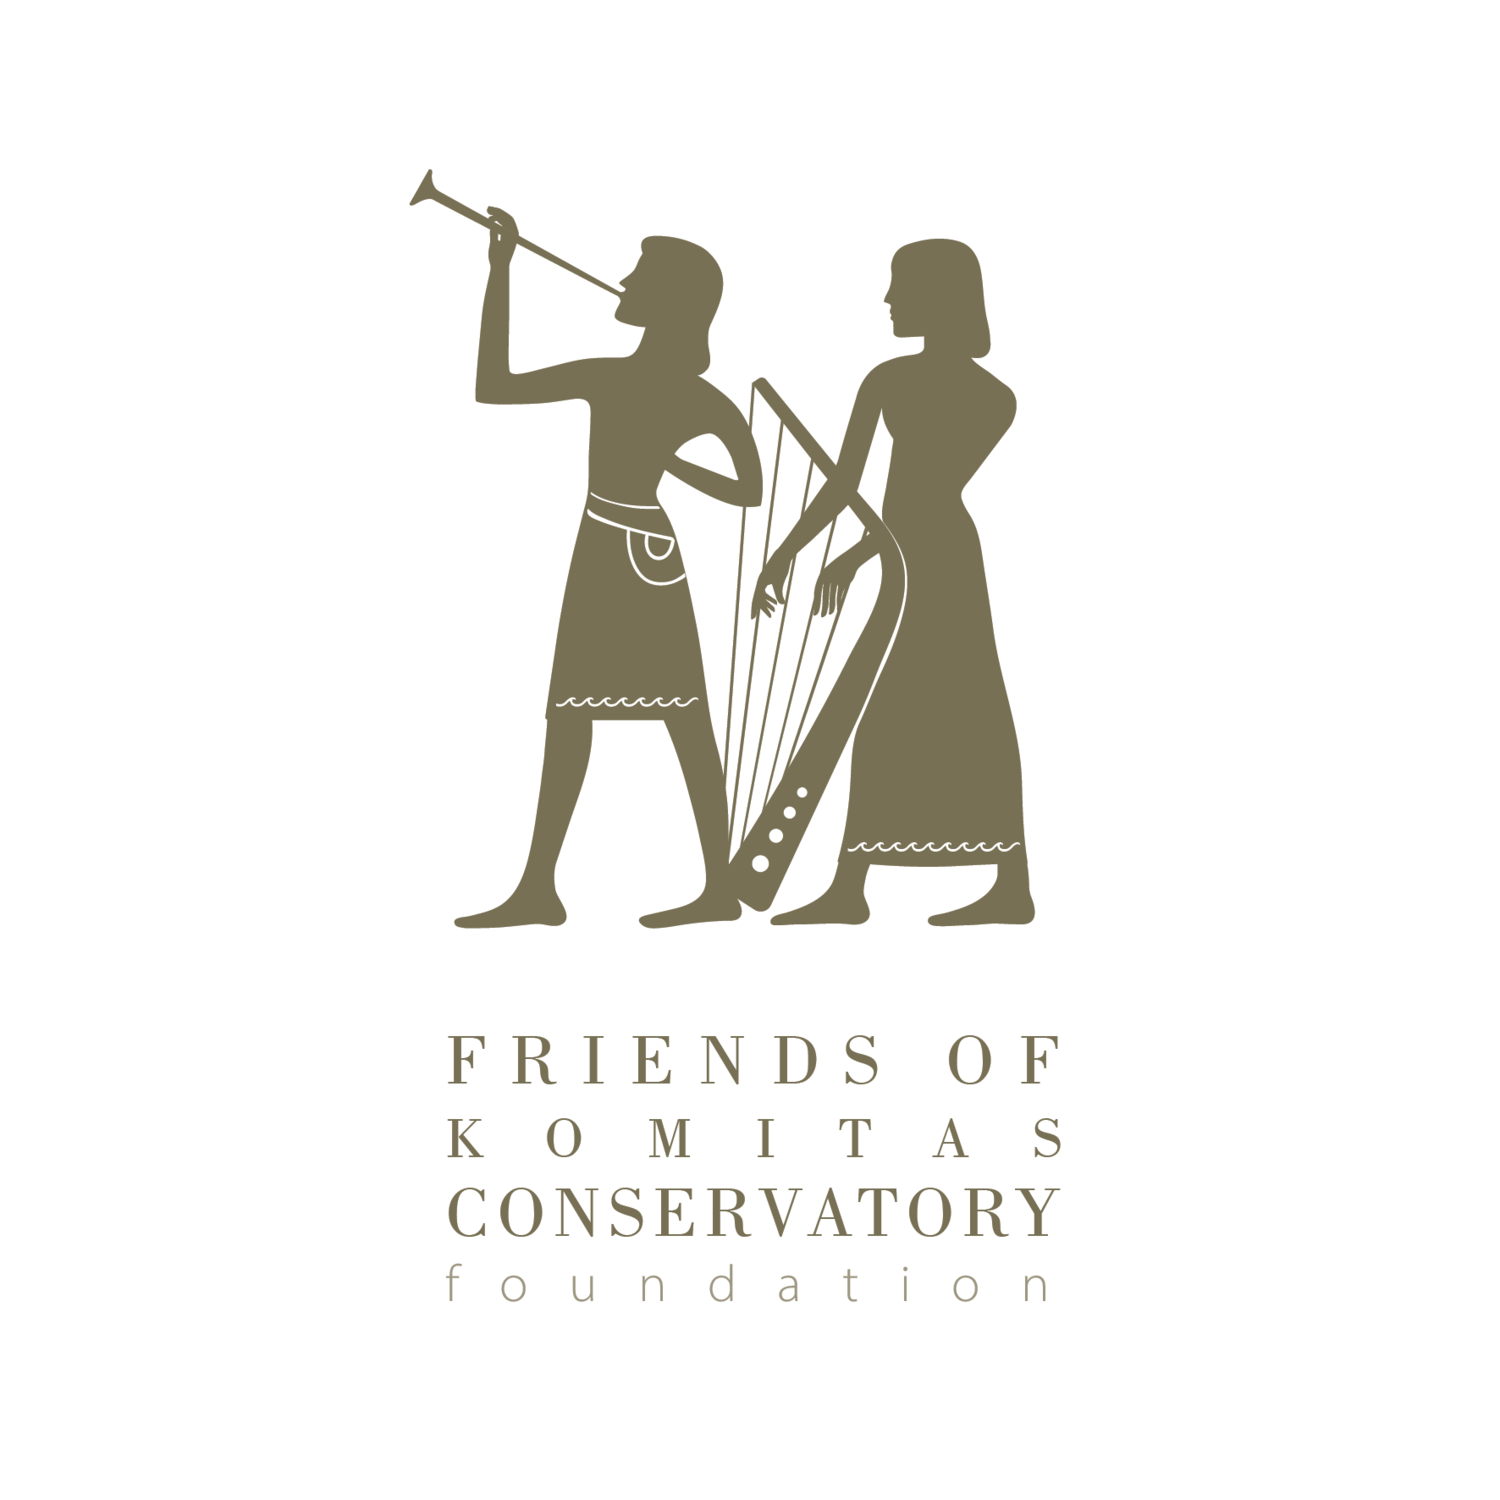 Friends of Conservatory Foundation